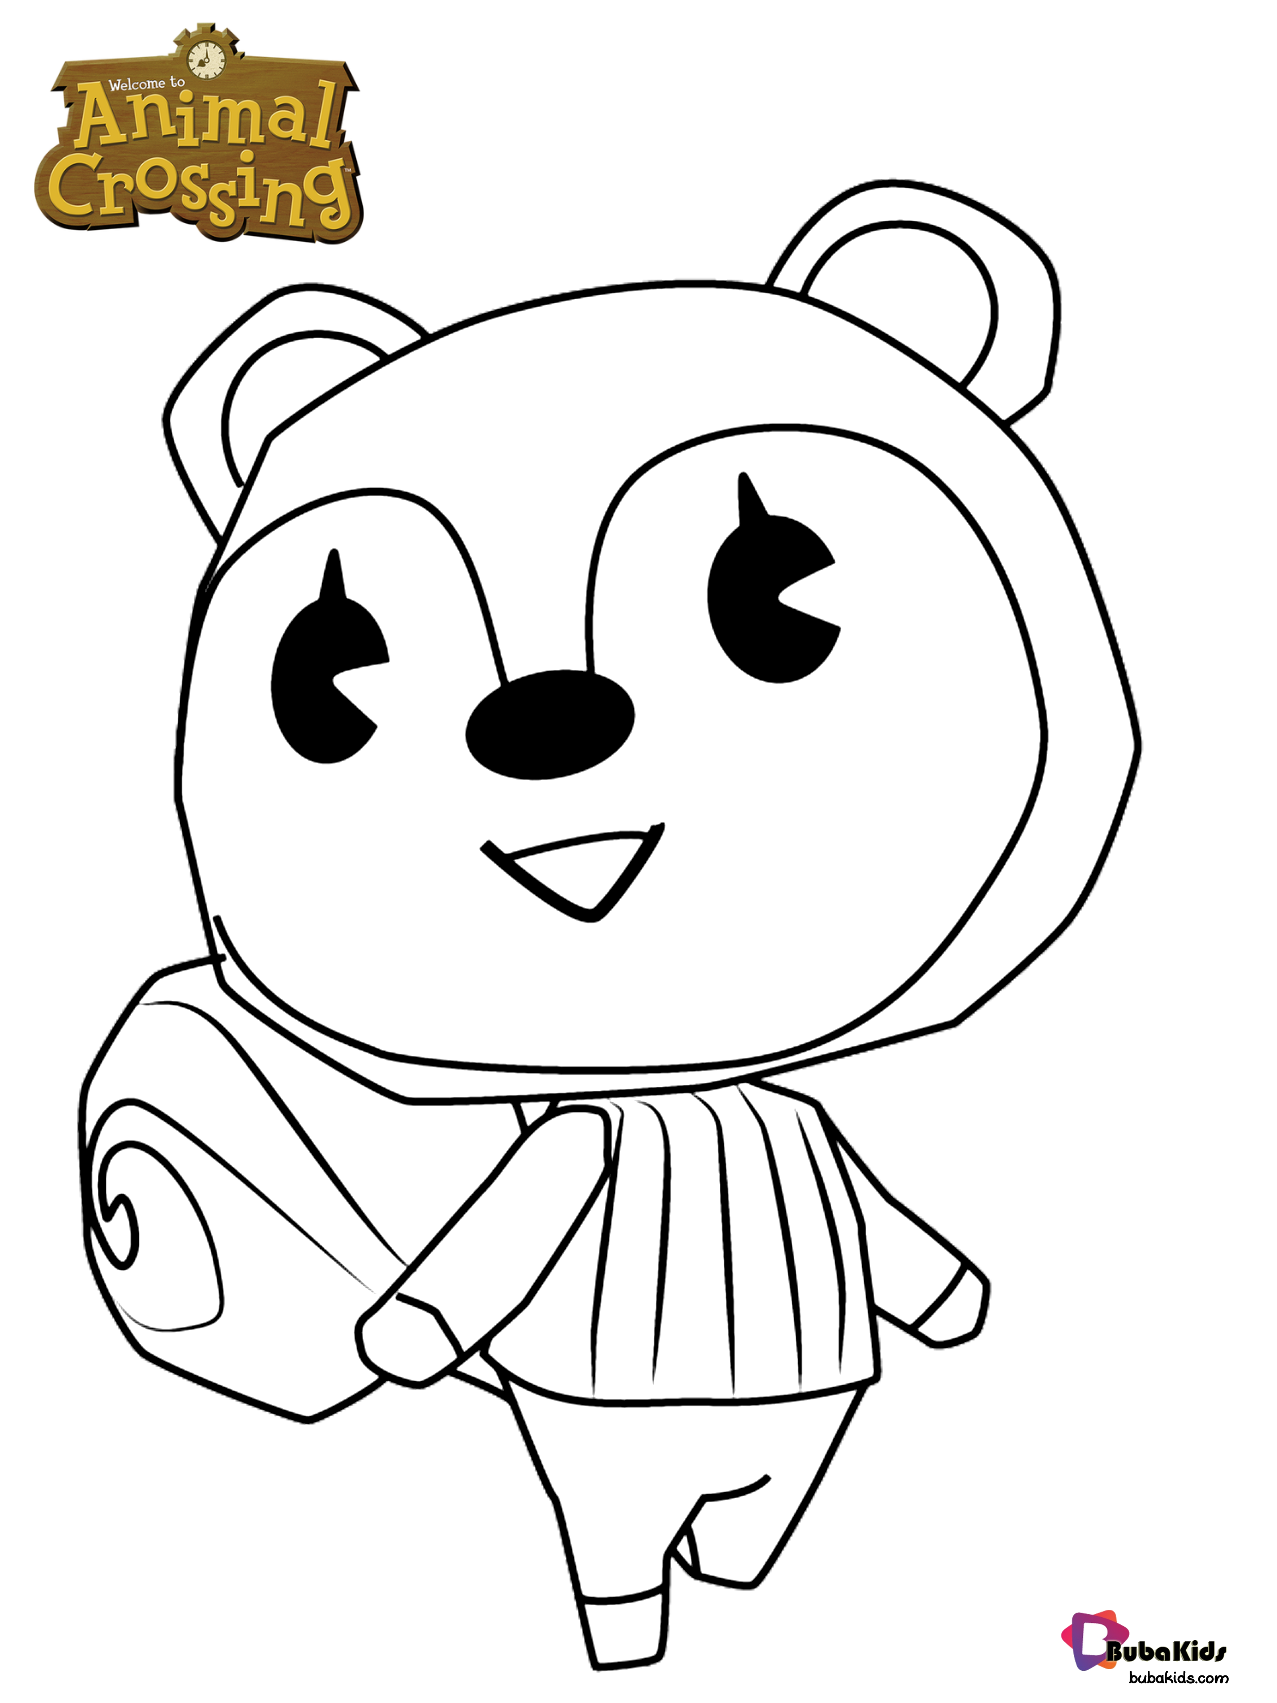 Free download and Printable Poppy Animal Crossing character coloring page